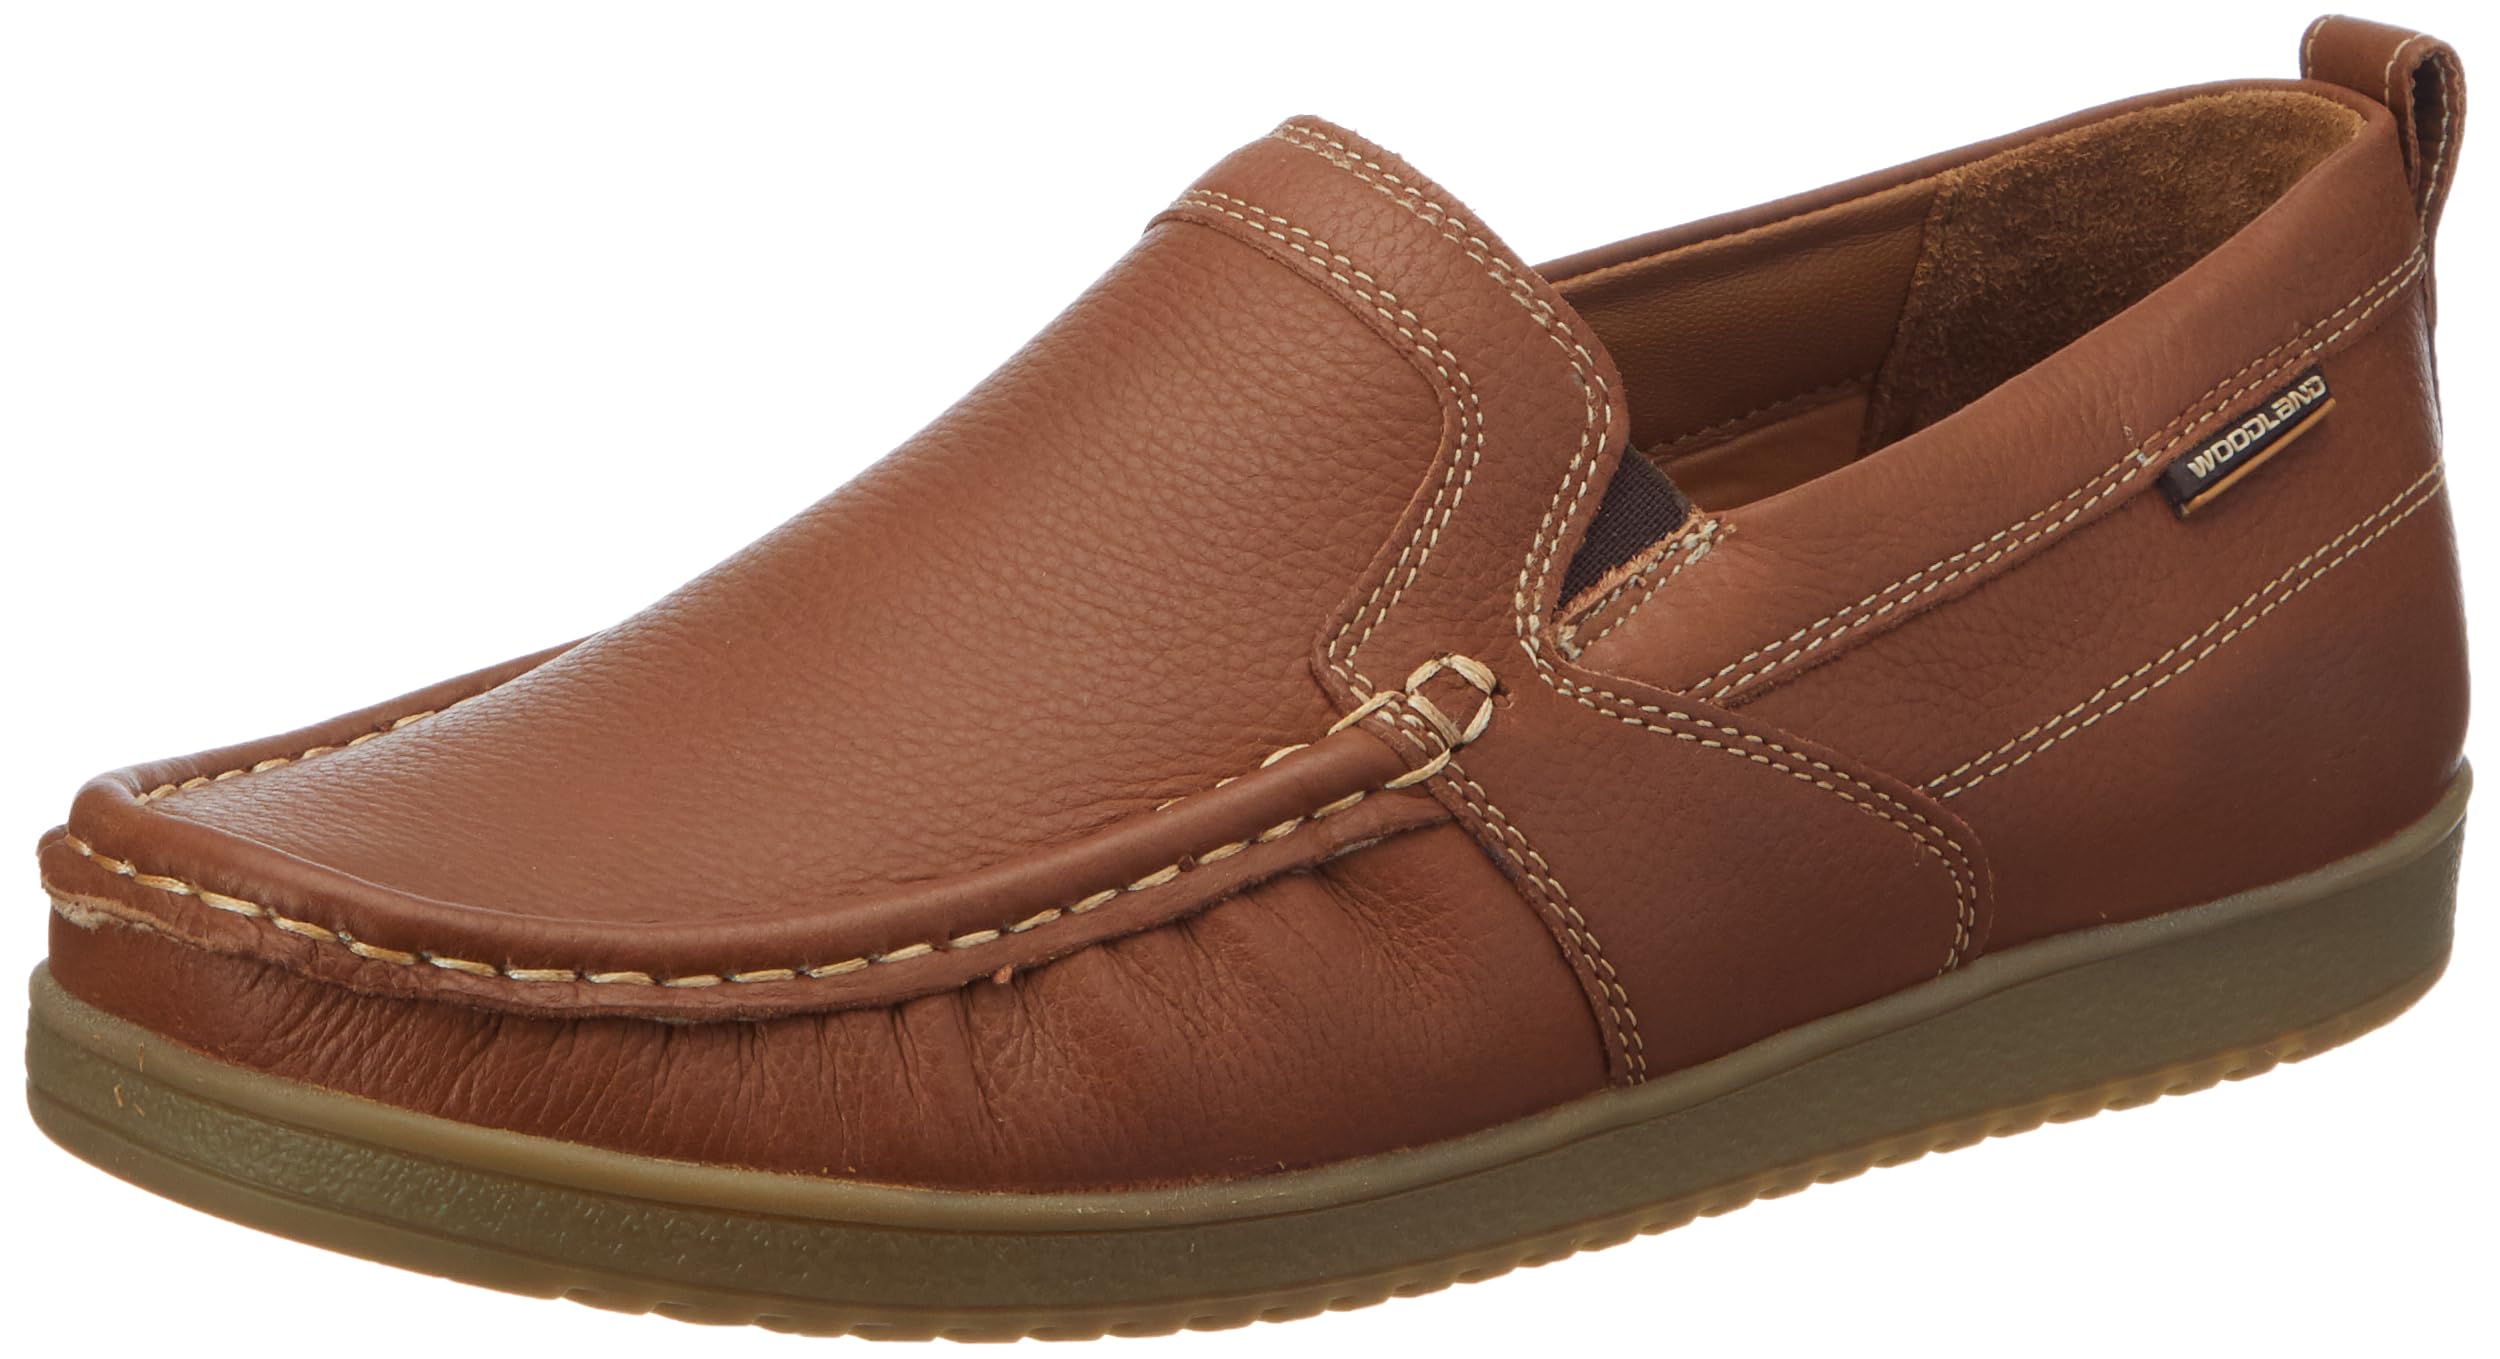 Buy Woodland Men's Cashew Brown Leather Casual Shoe-6 UK (40 EU) (OGCC  3462119NW) at Amazon.in